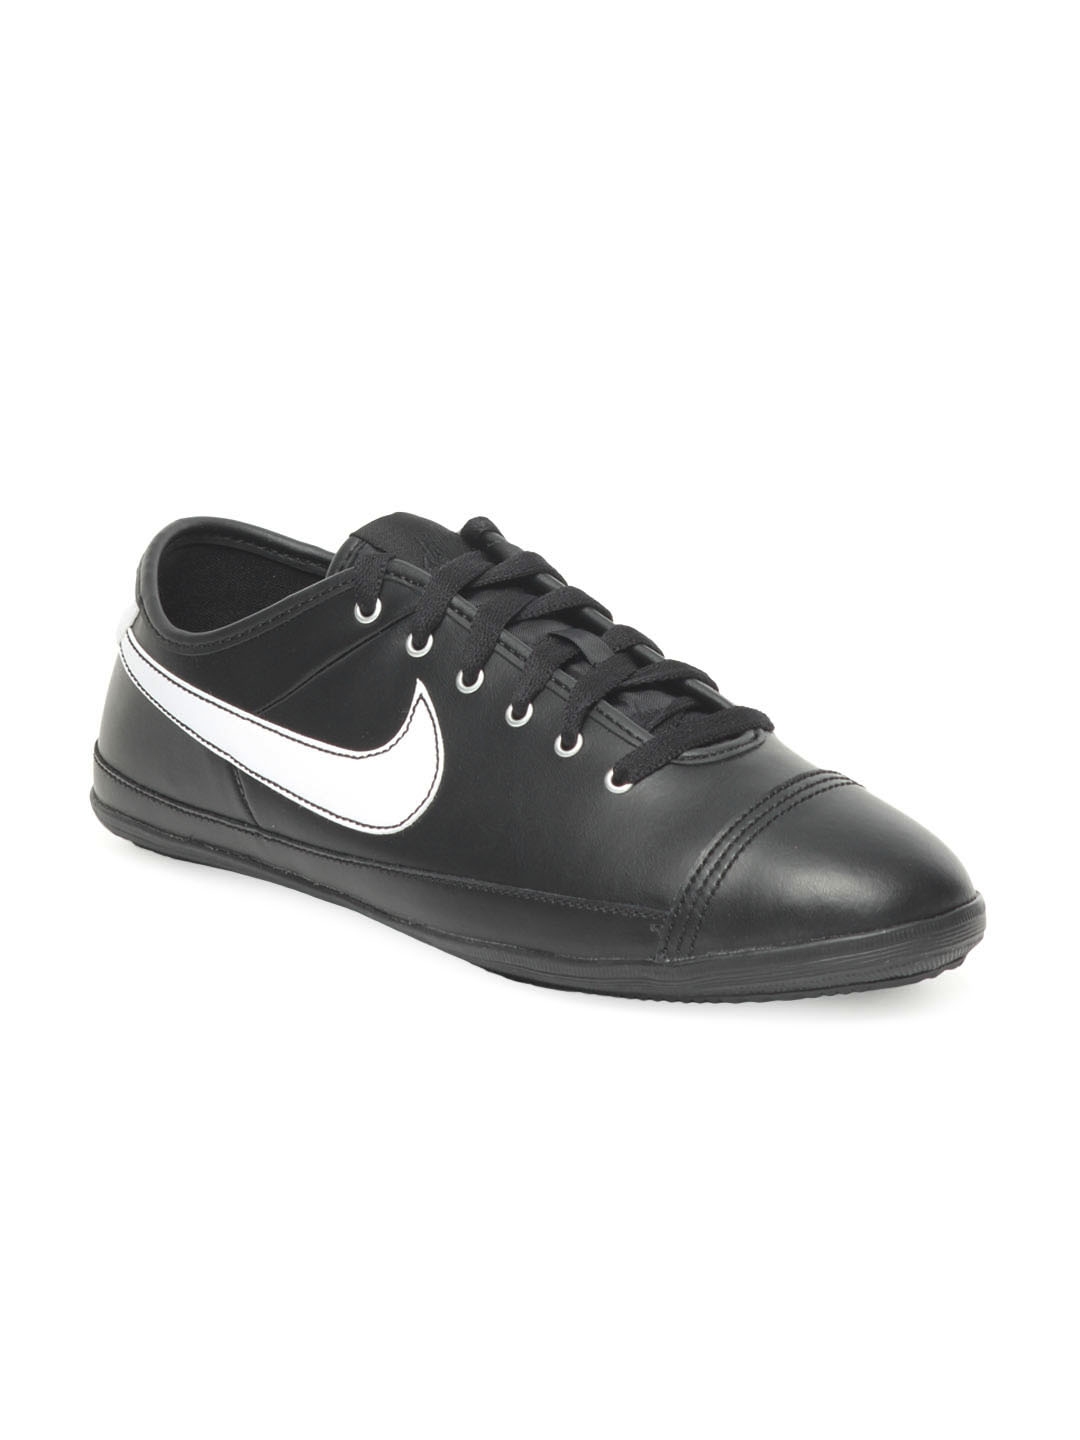 Buy Nike Men Flash Shoes - Casual Shoes for 66840 | Myntra